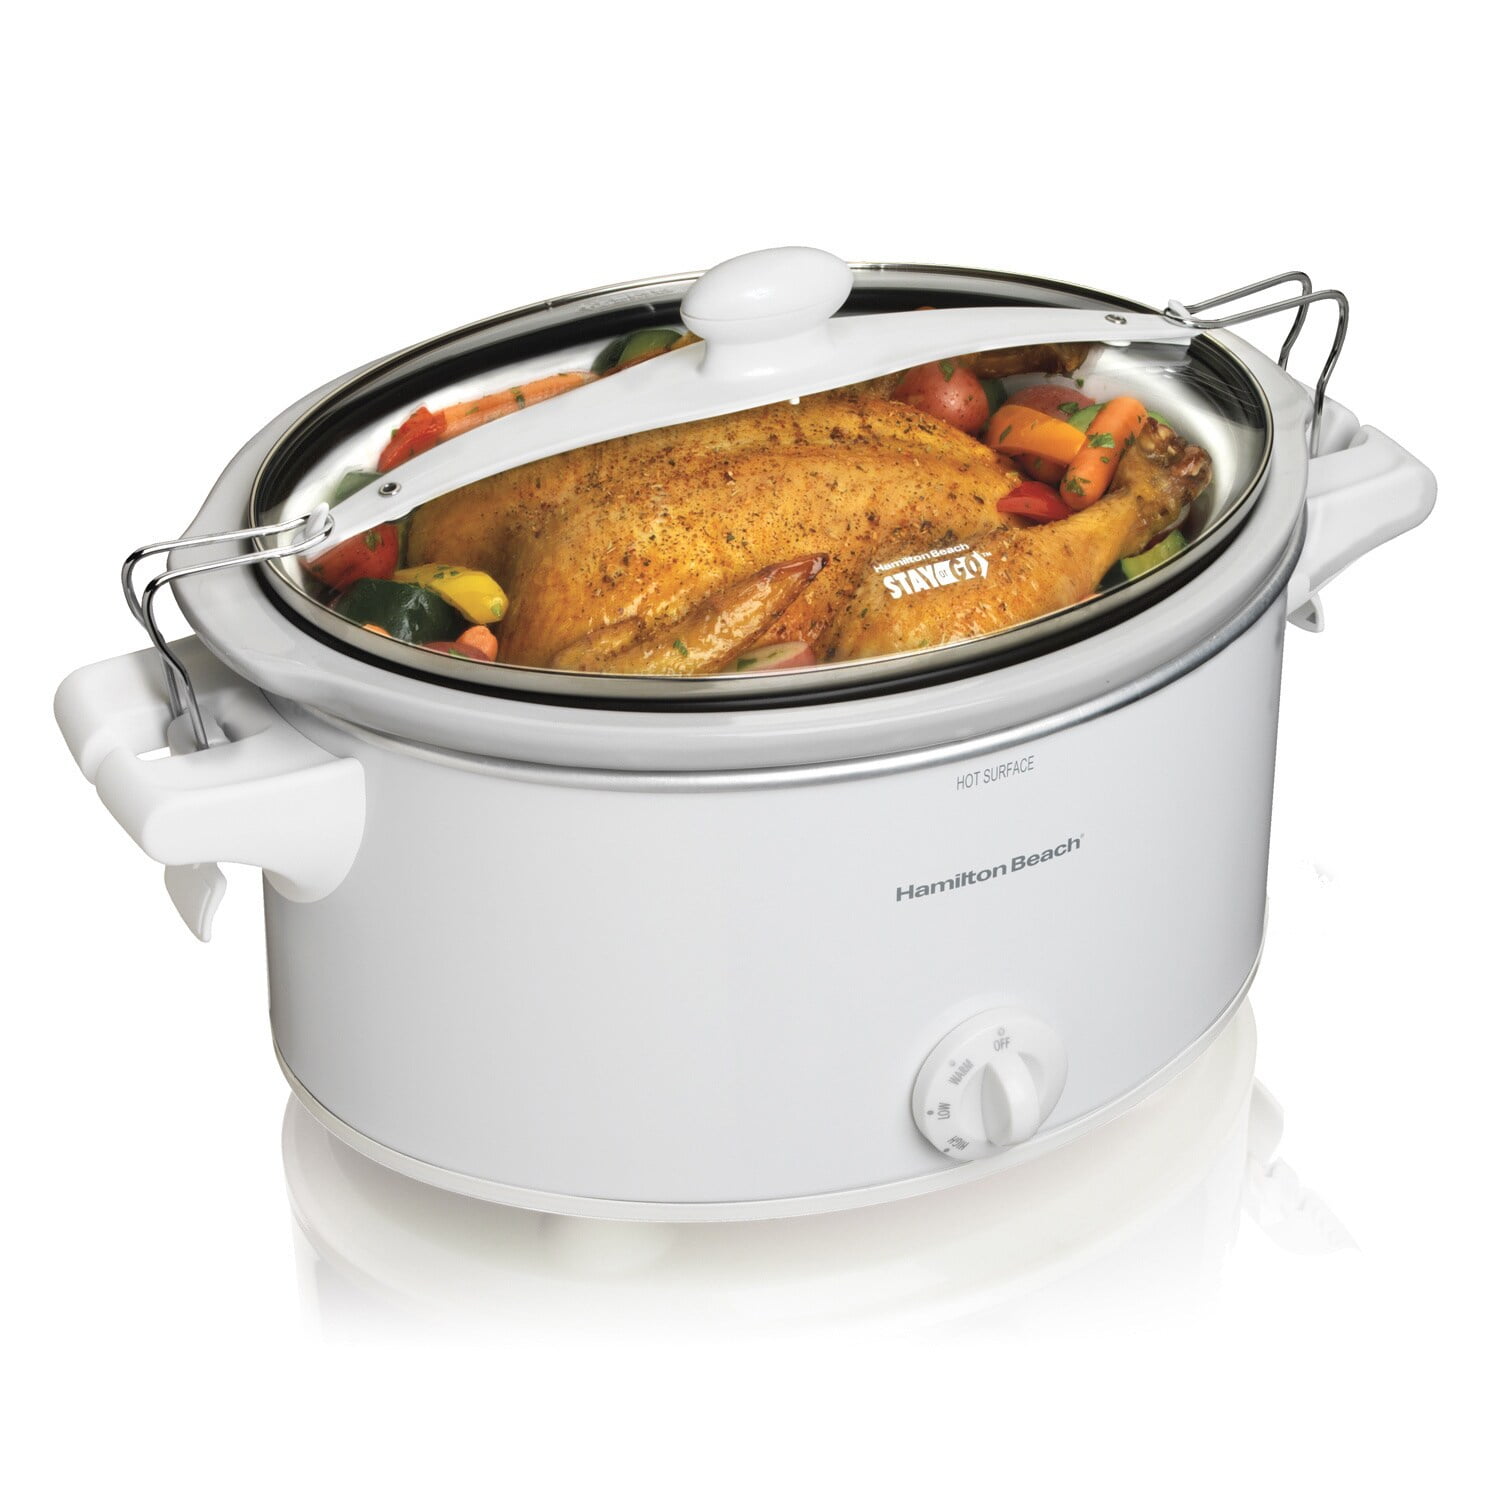 Hamilton Beach Stay or Go 6-Quart Slow Cooker - White in the Slow